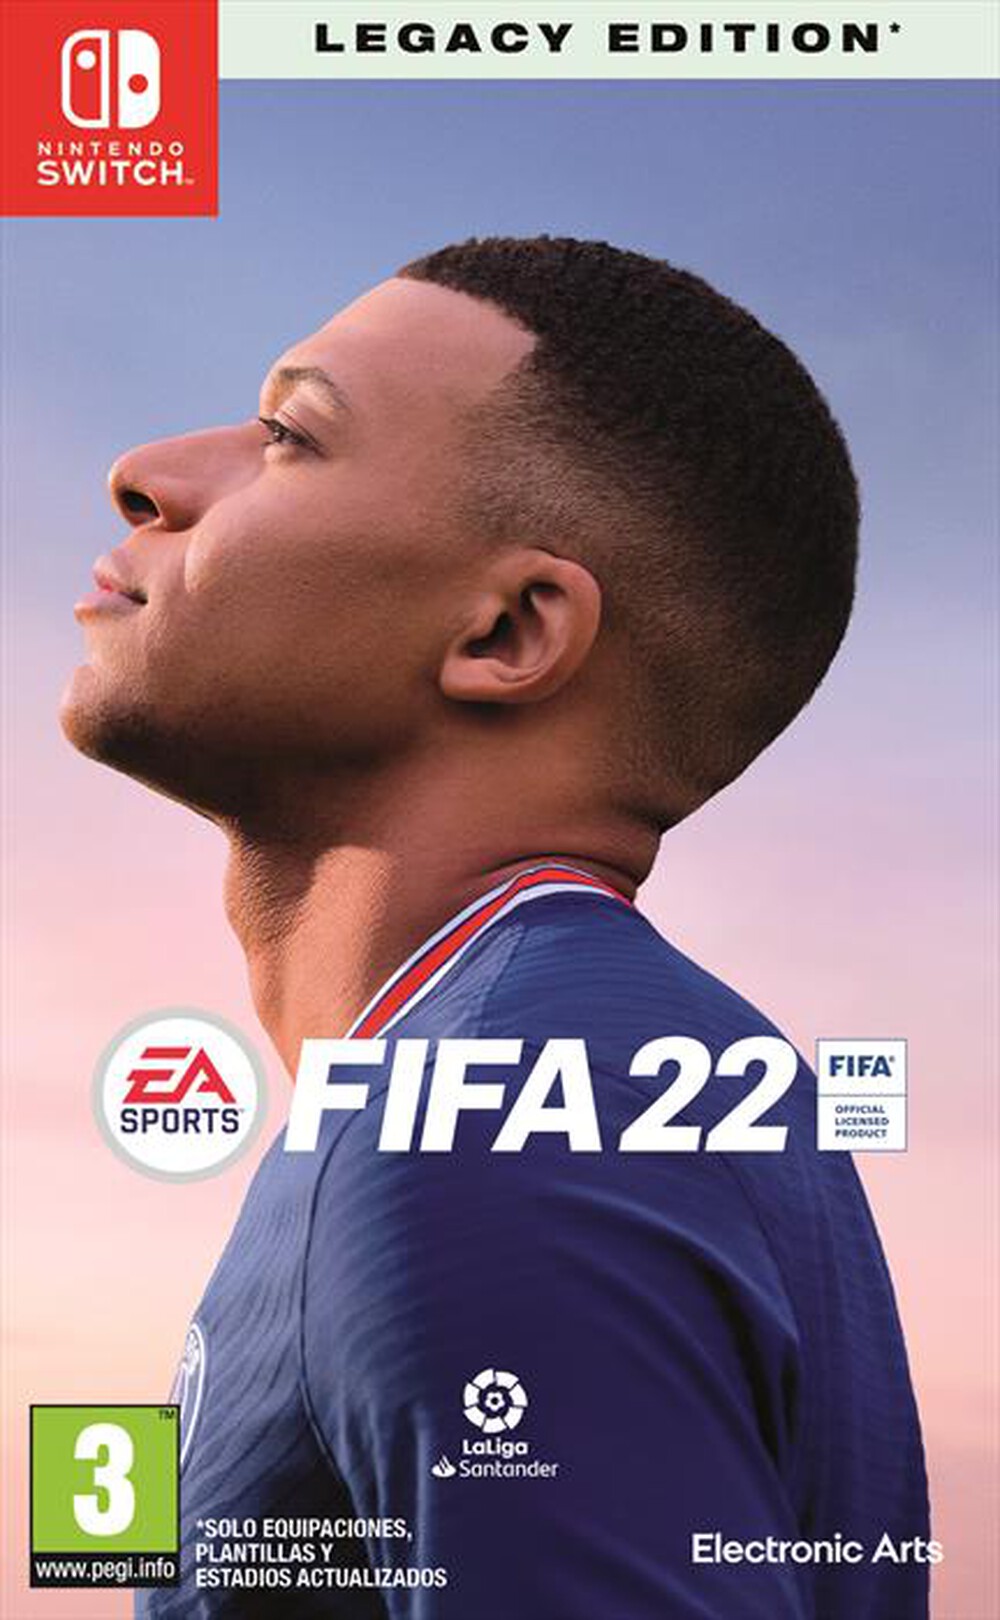 "ELECTRONIC ARTS - FIFA 22 SWITCH"